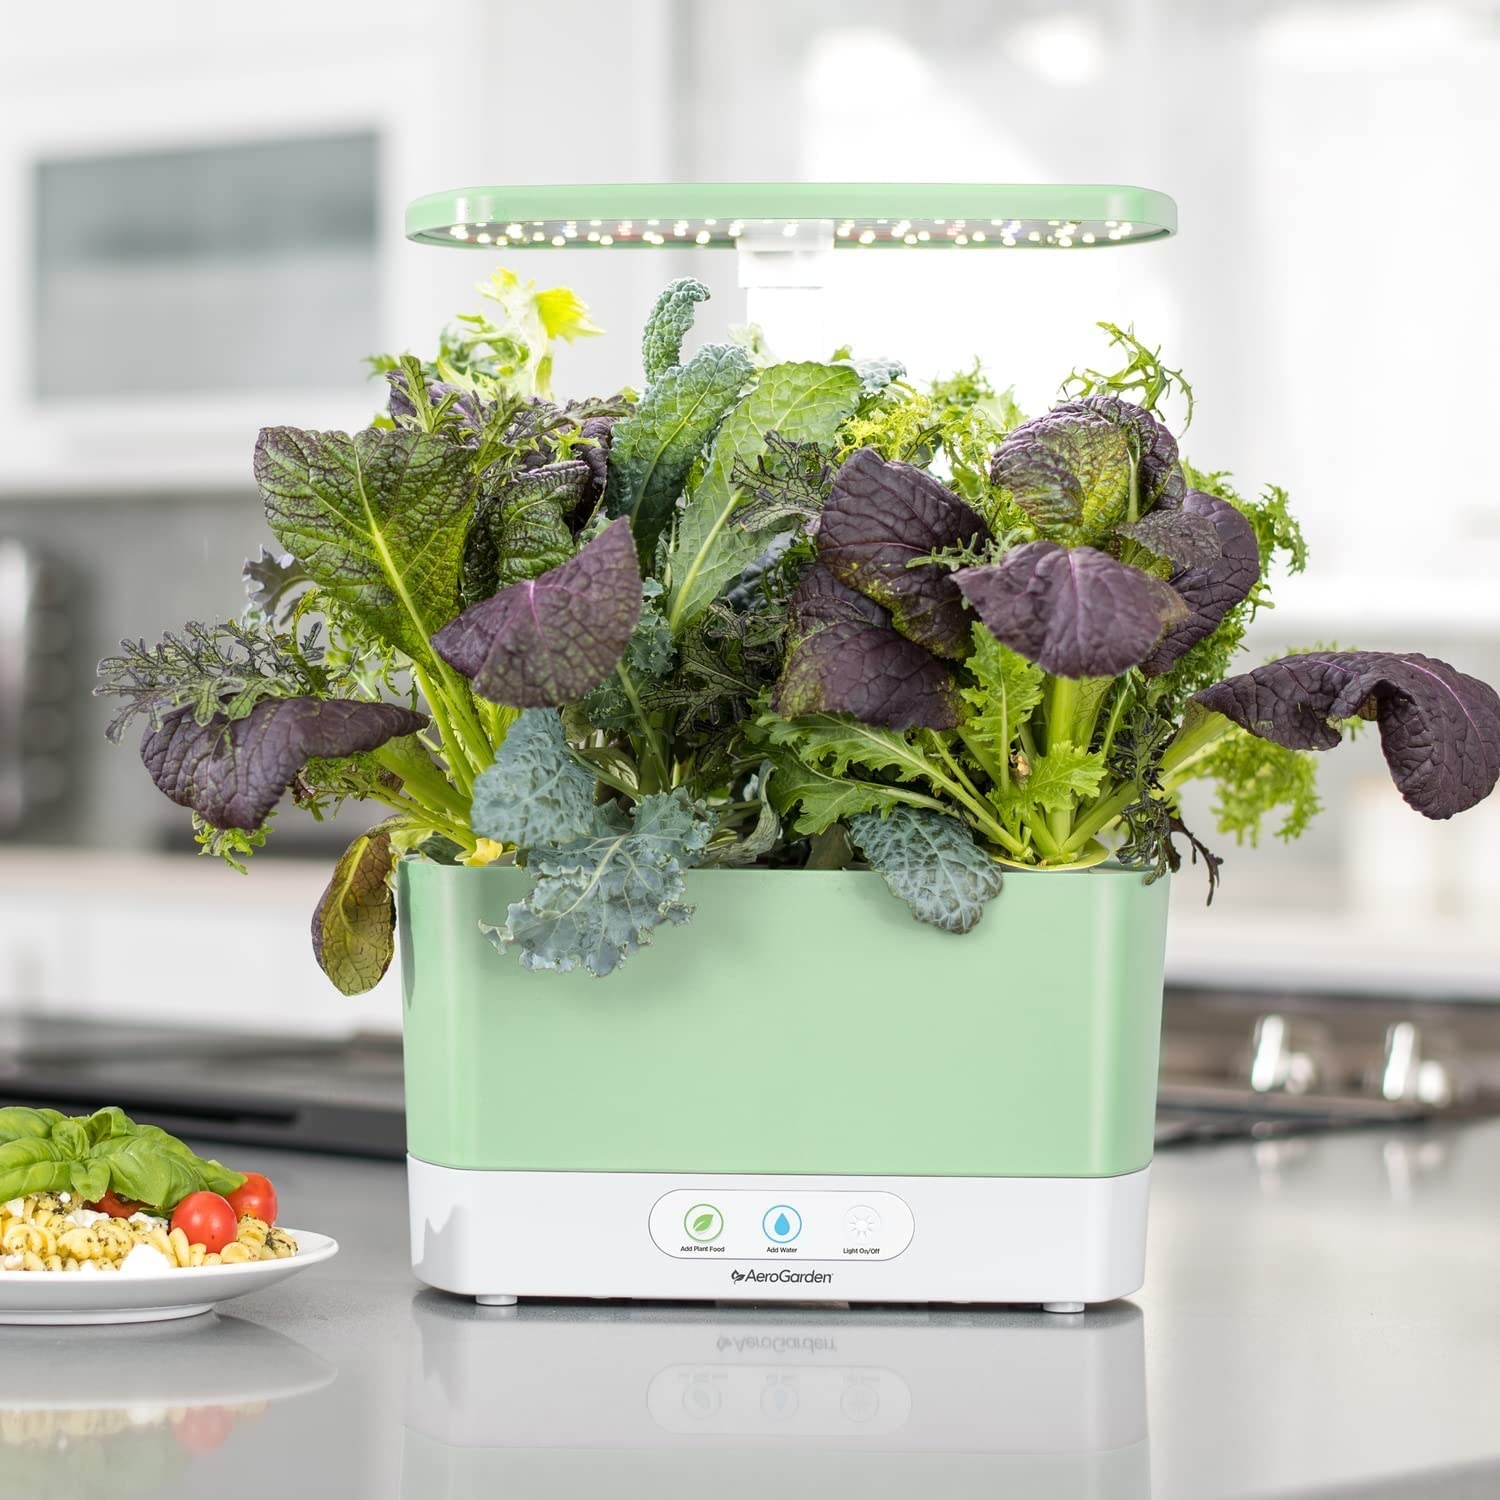 the green AeroGarden sprouting with herbs